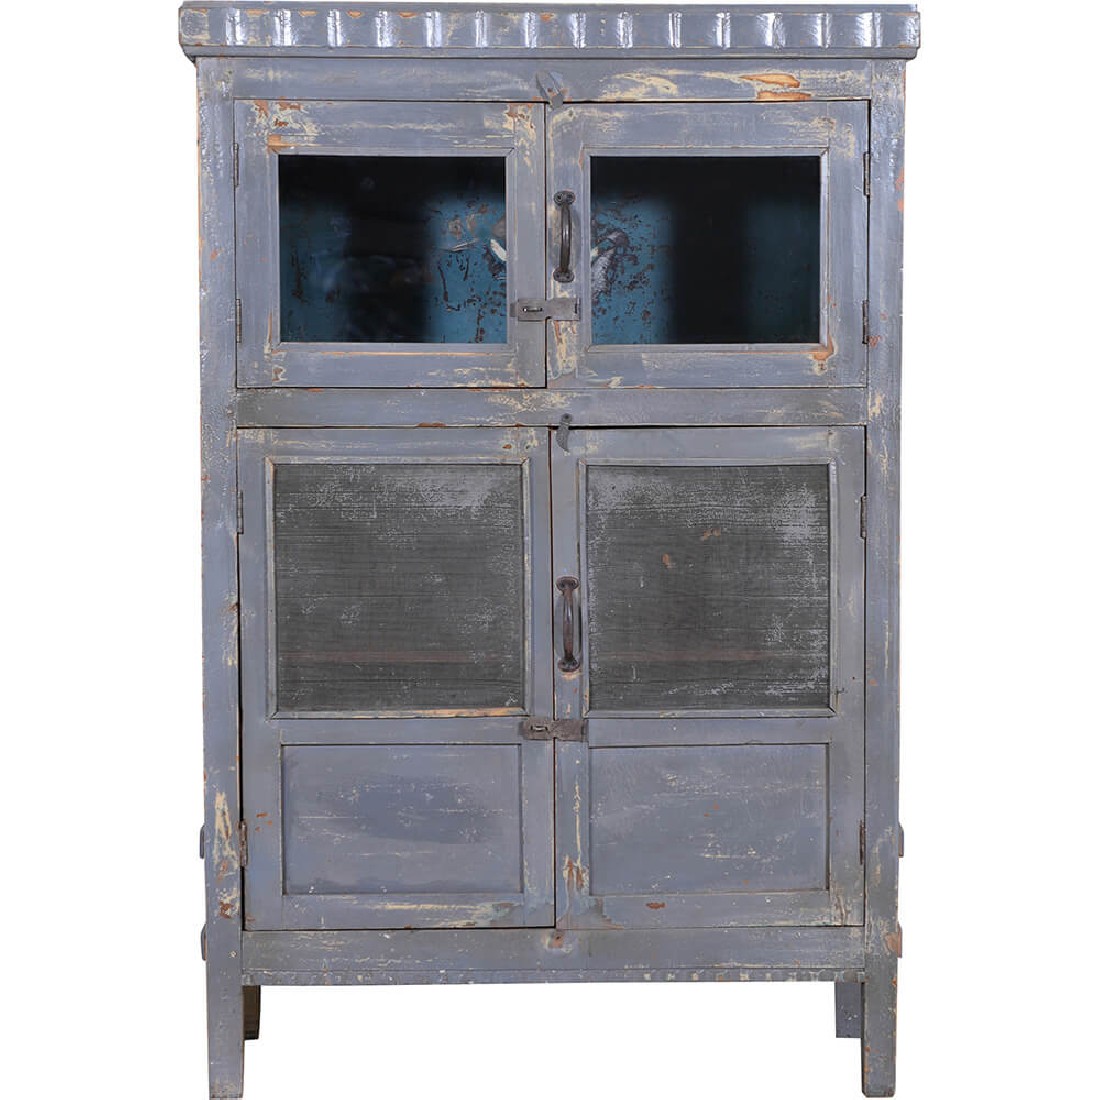 Trademark Grey display cabinet with rustic charm3dhaus.gr